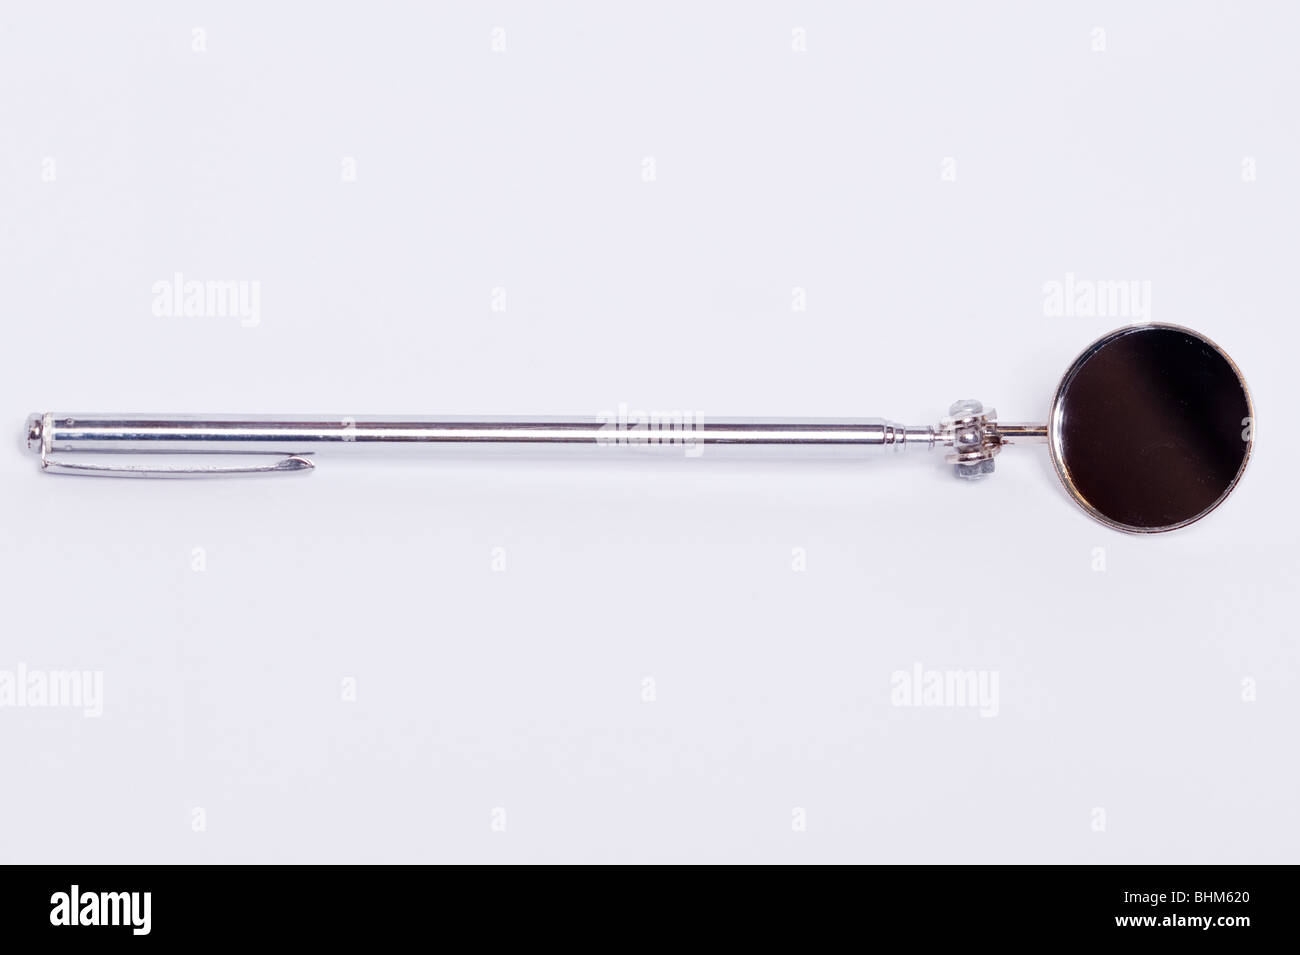 A telescopic mirror for viewing things in awkward places on a white background Stock Photo